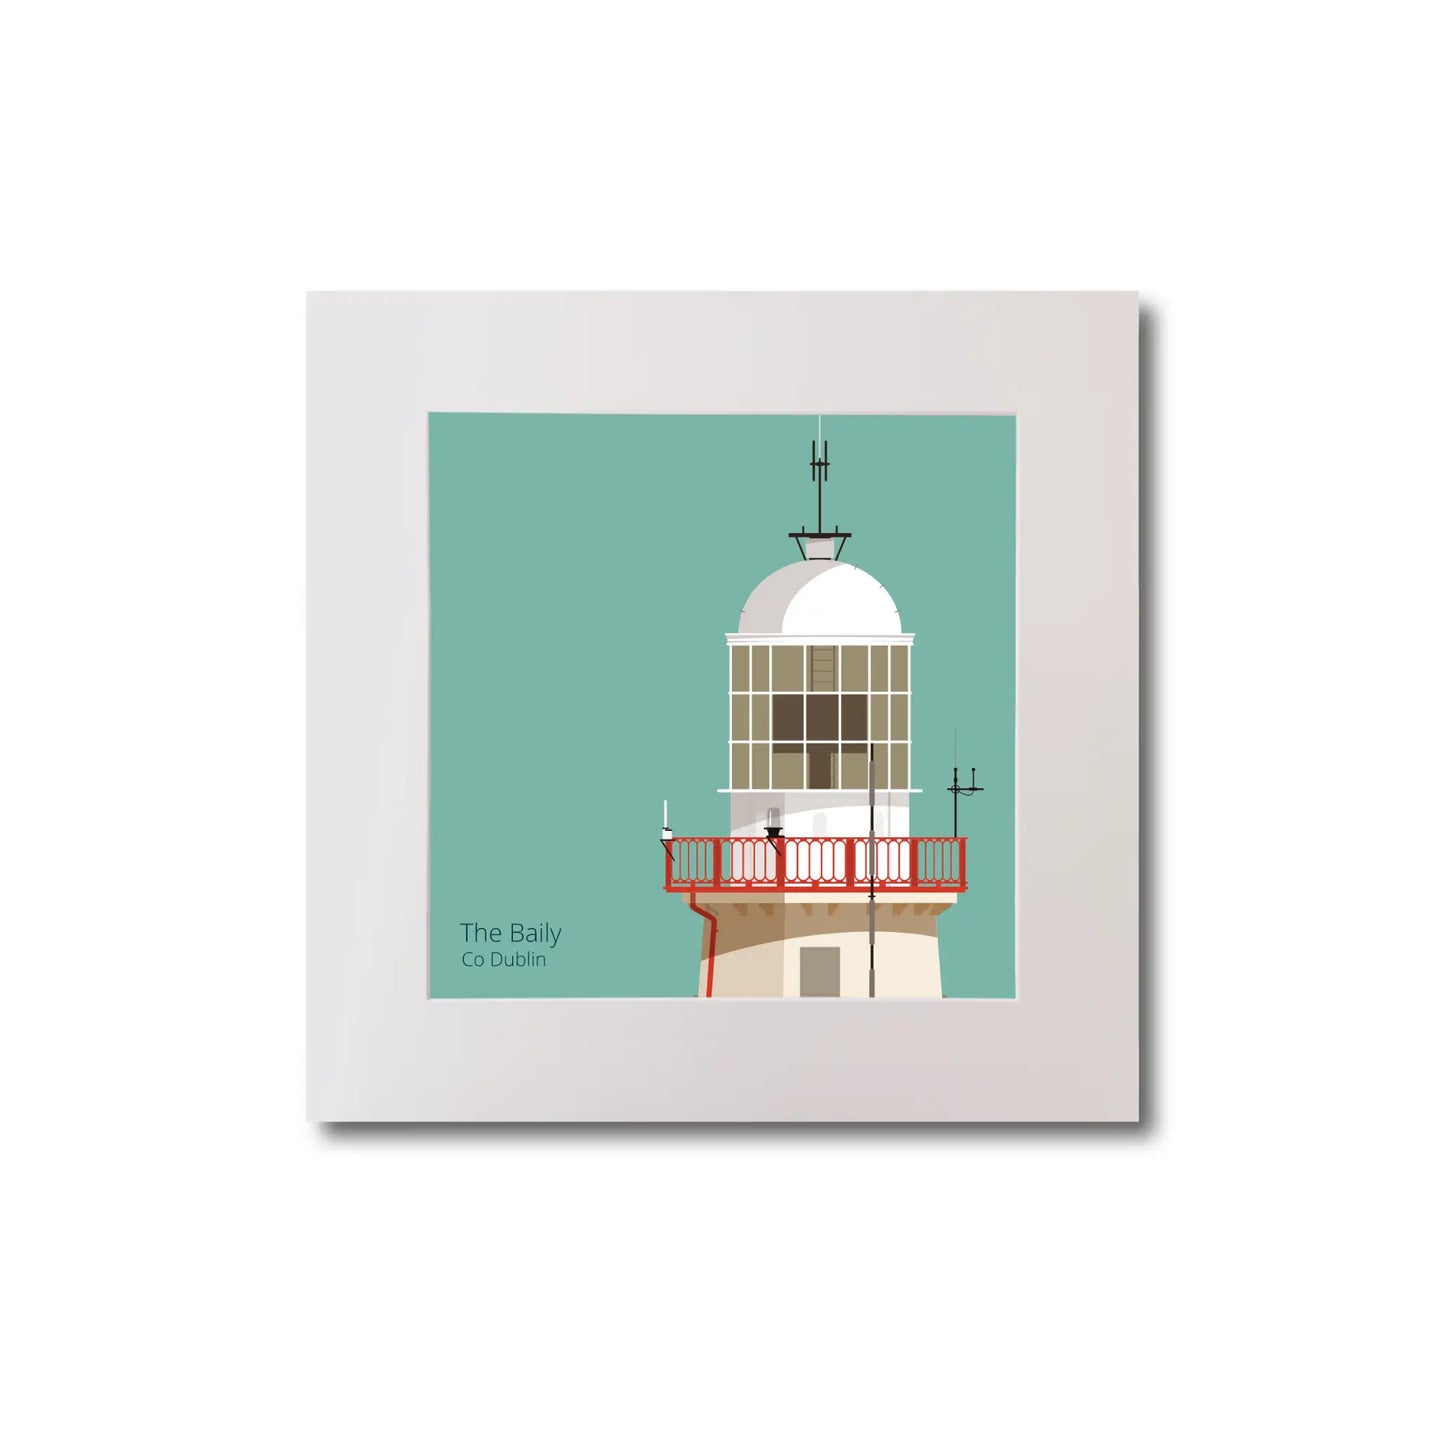 Illustration of The Baily lighthouse on an ocean green background, mounted and measuring 20x20cm.